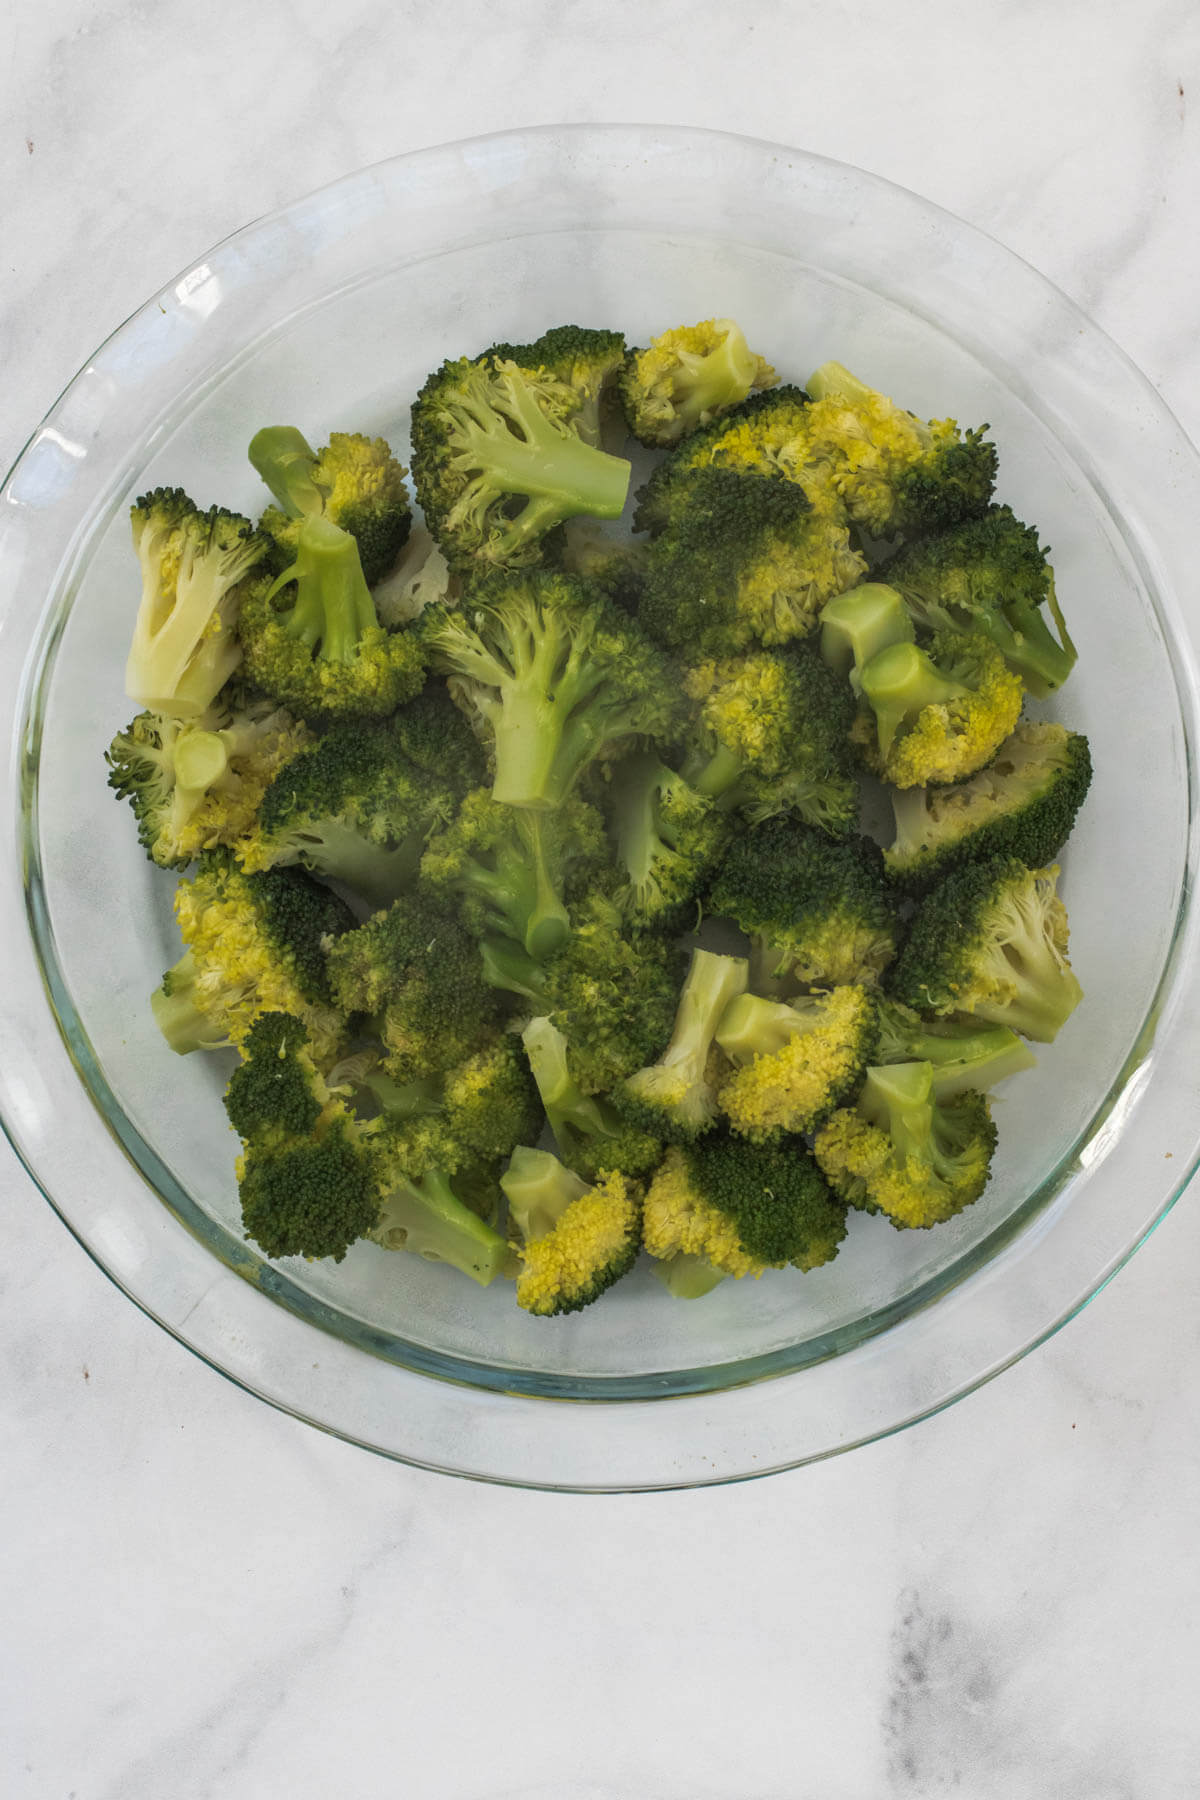 Steamed broccoli florets in the base of a baking dish.